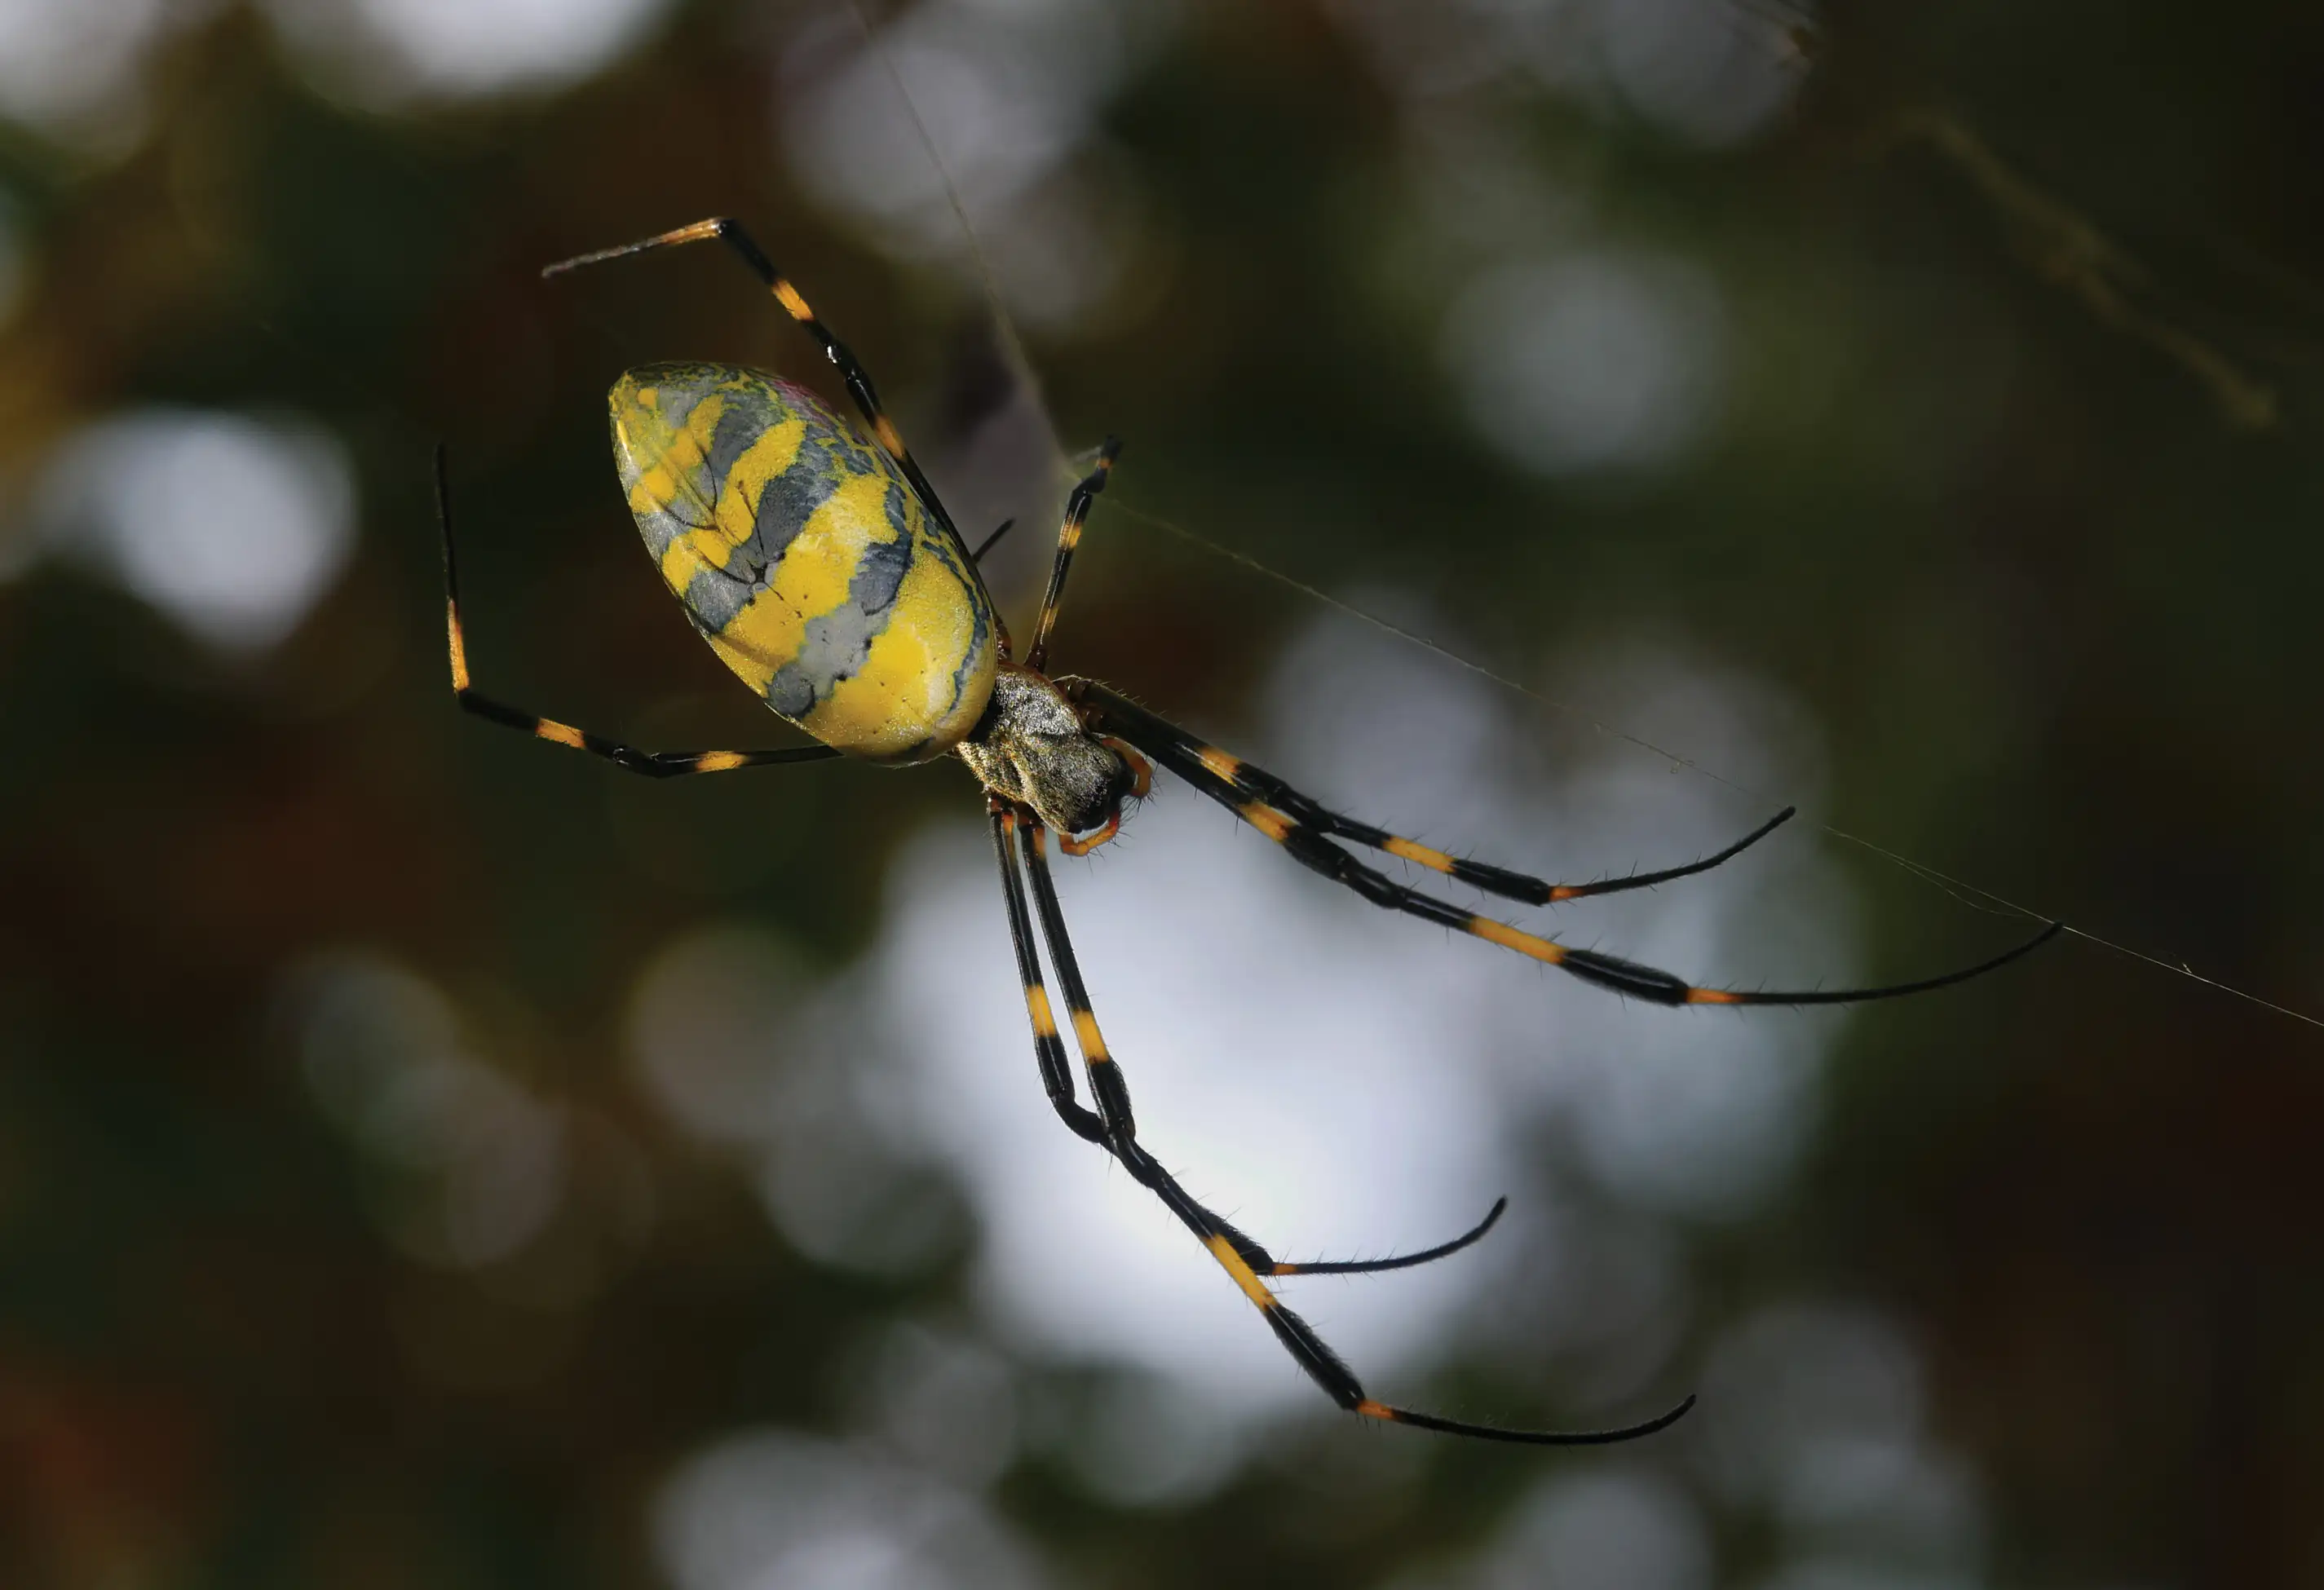 Colorful yellow, silver, and black Joro spider on its web